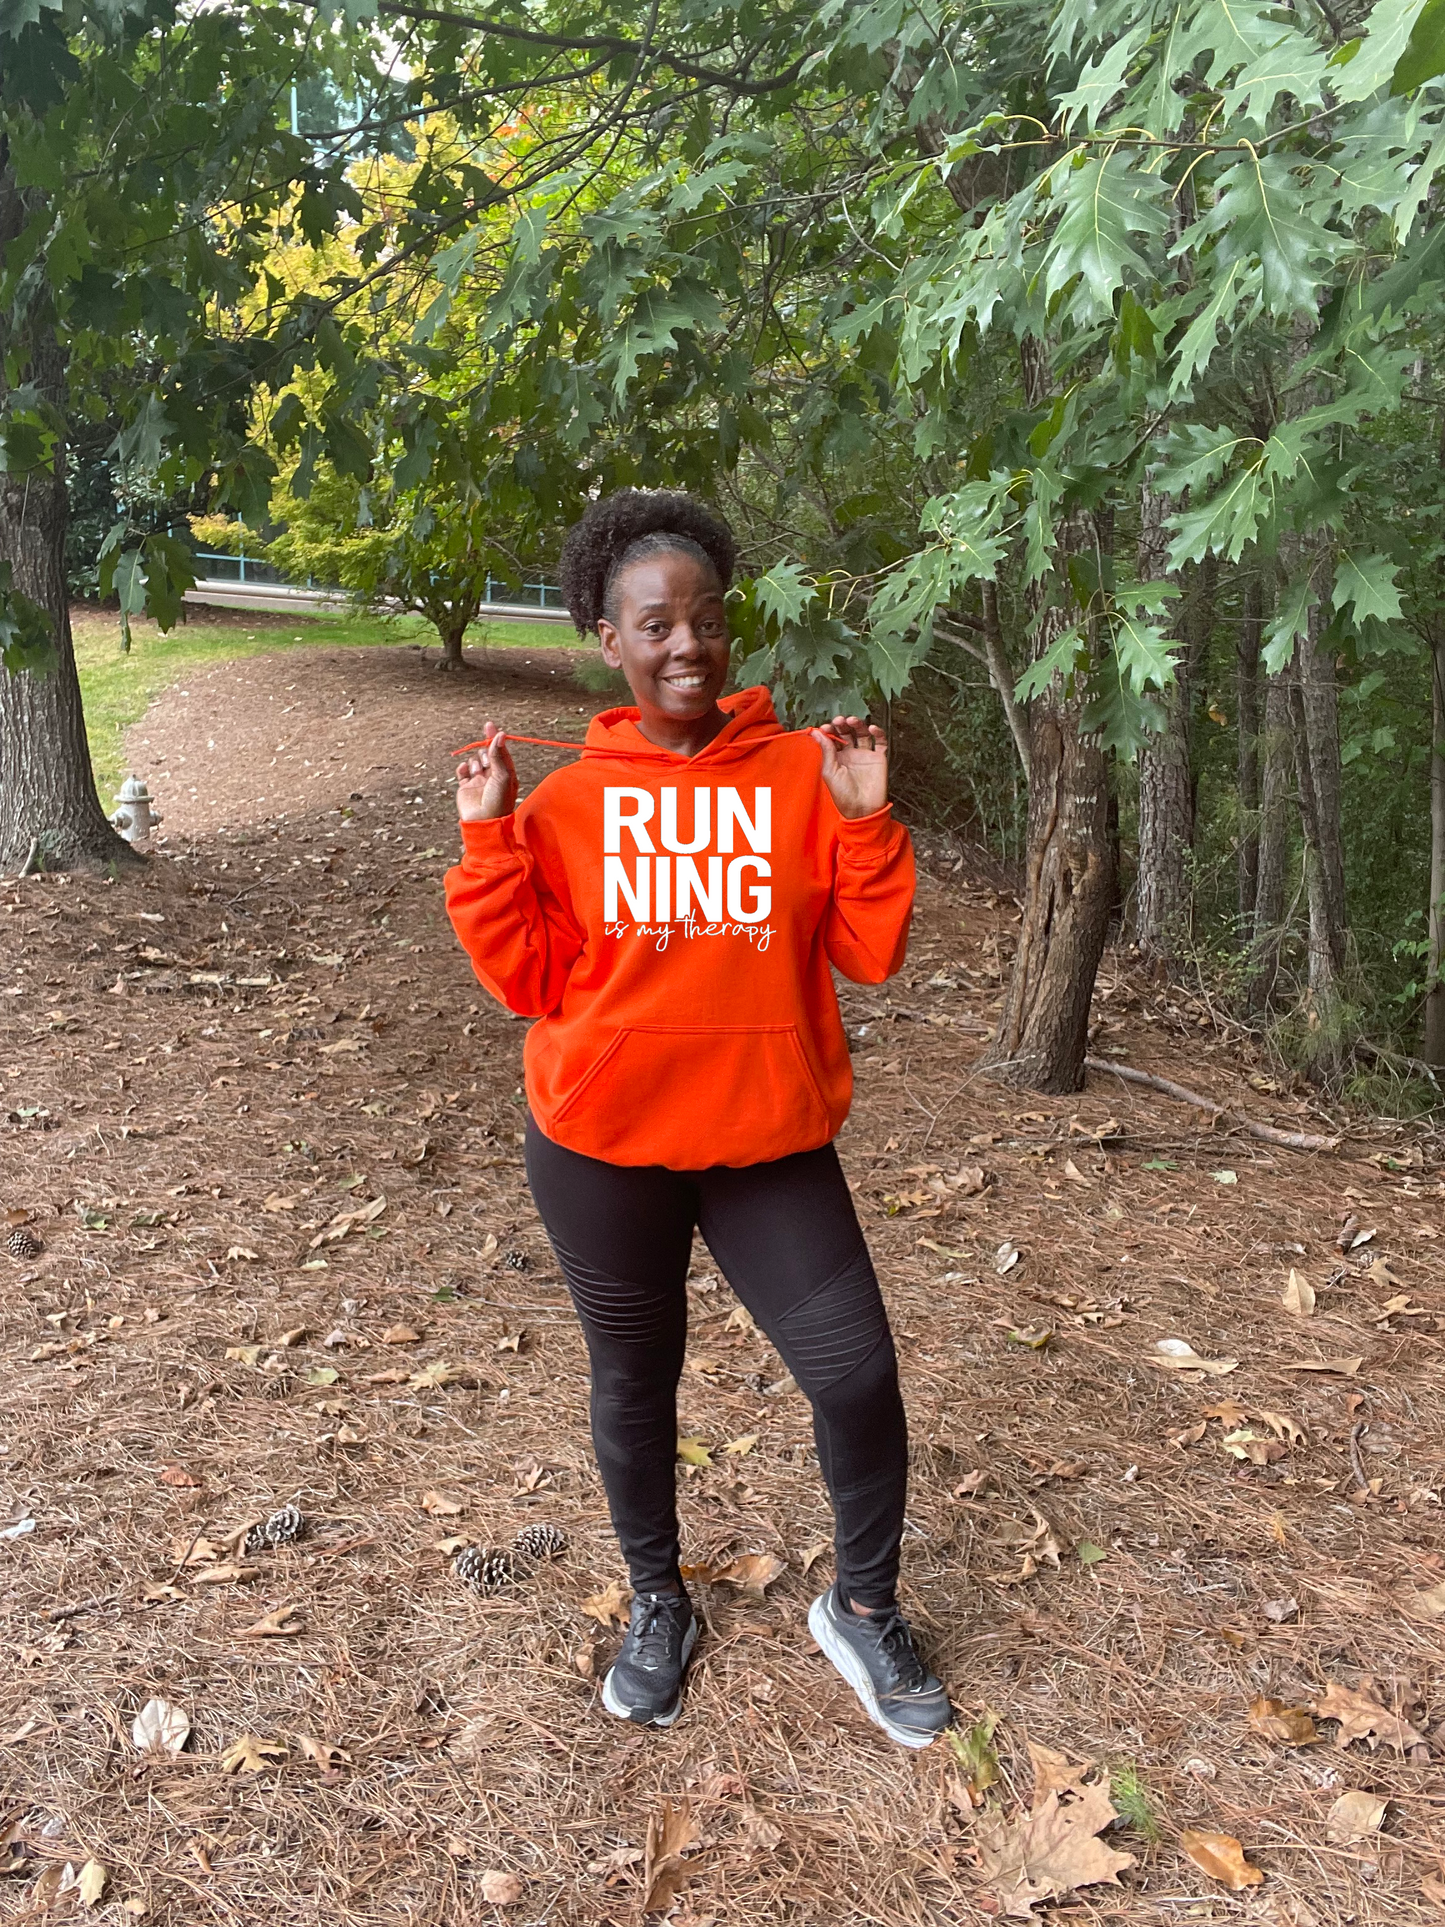 Running is My Therapy Bright Colors Hoodie